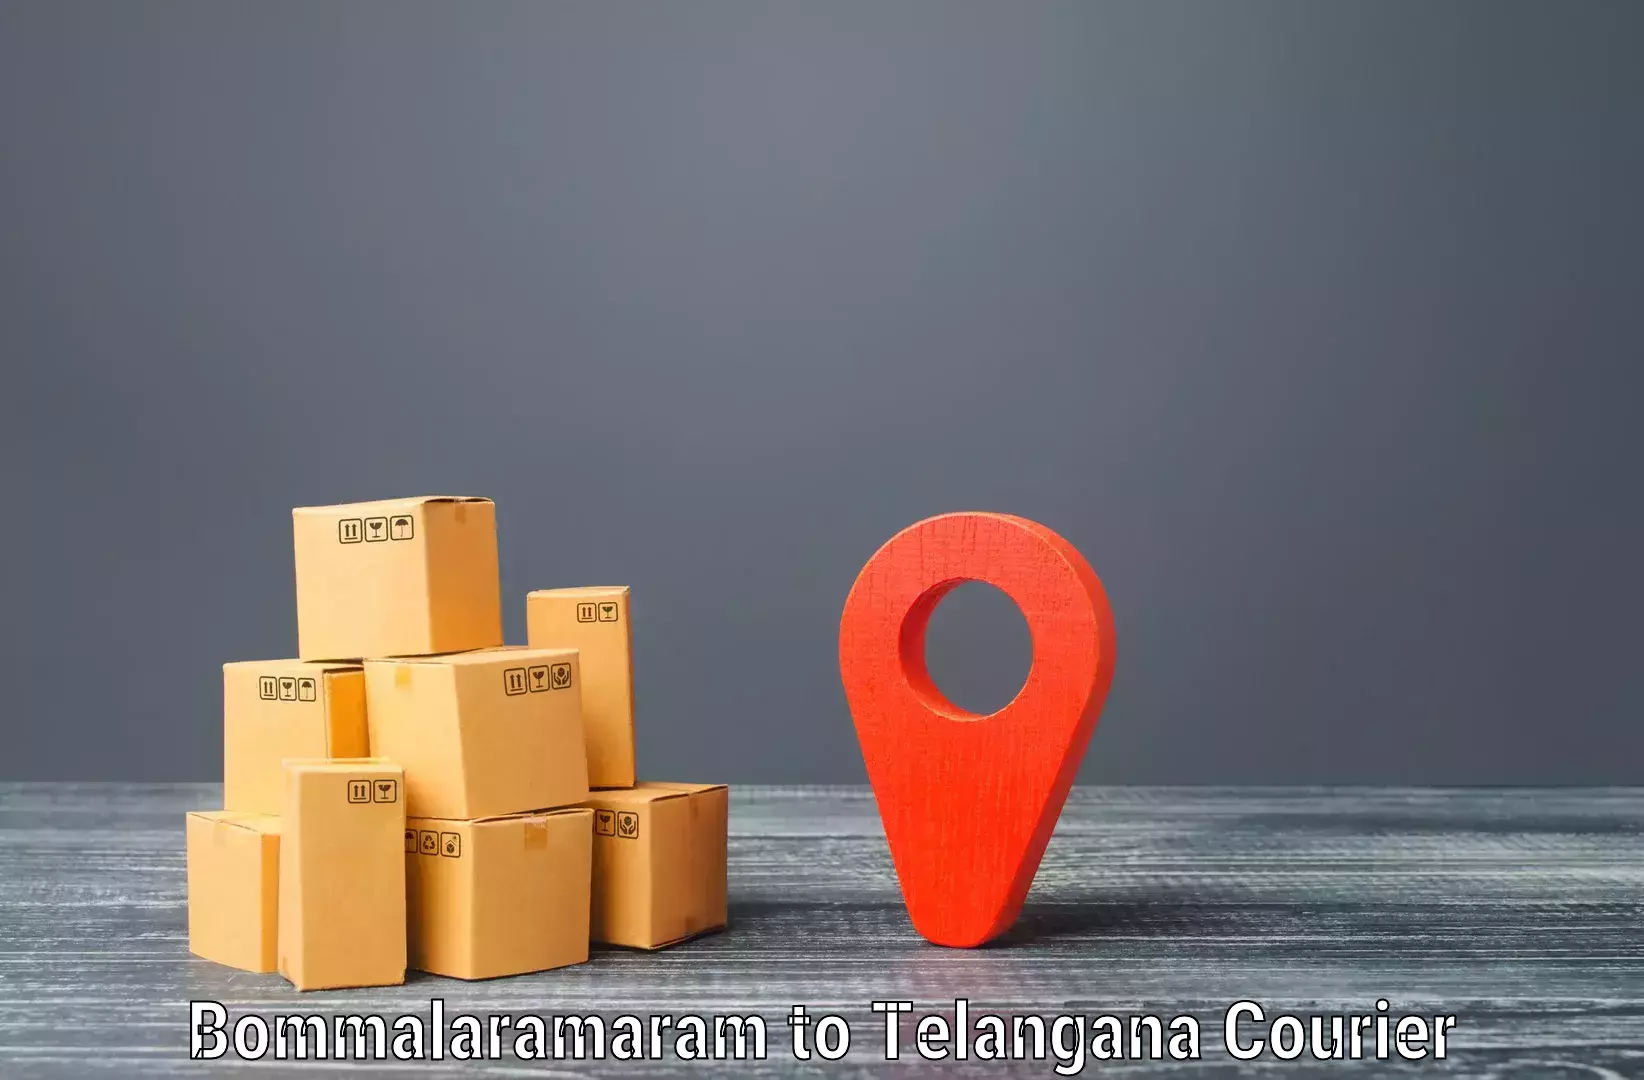 Easy access courier services in Bommalaramaram to Amangal